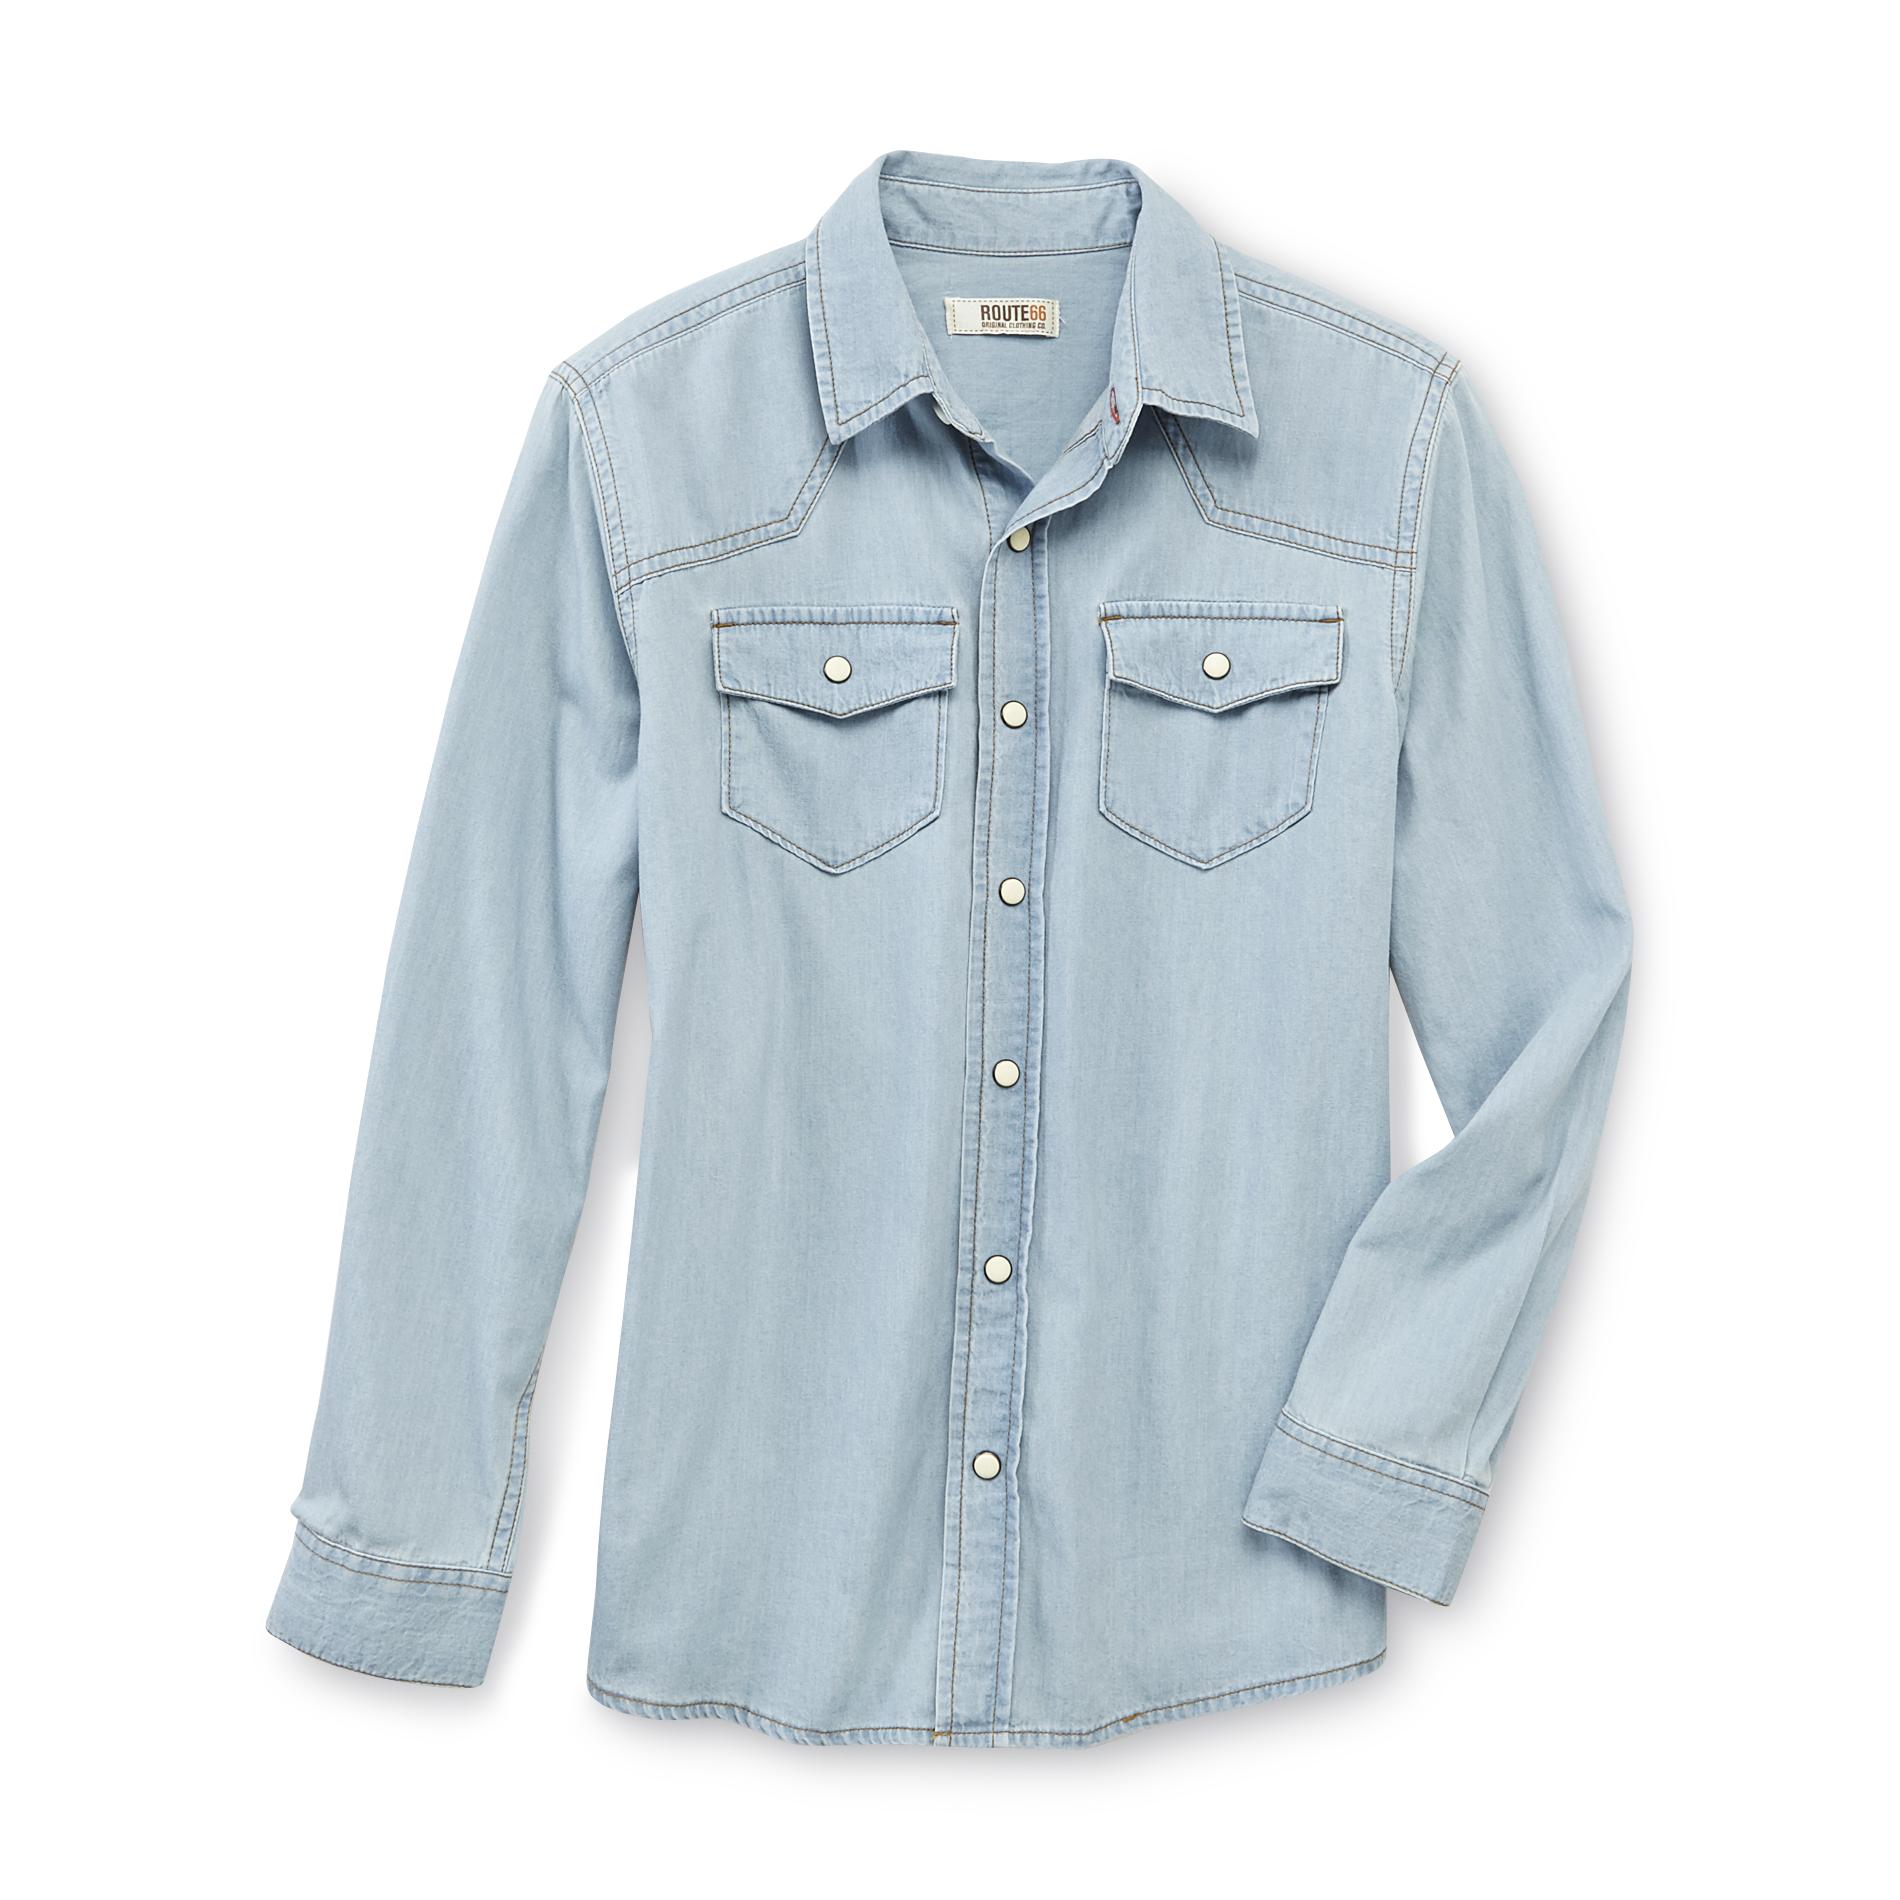 Route 66 Boy's Chambray Snap-Front Shirt